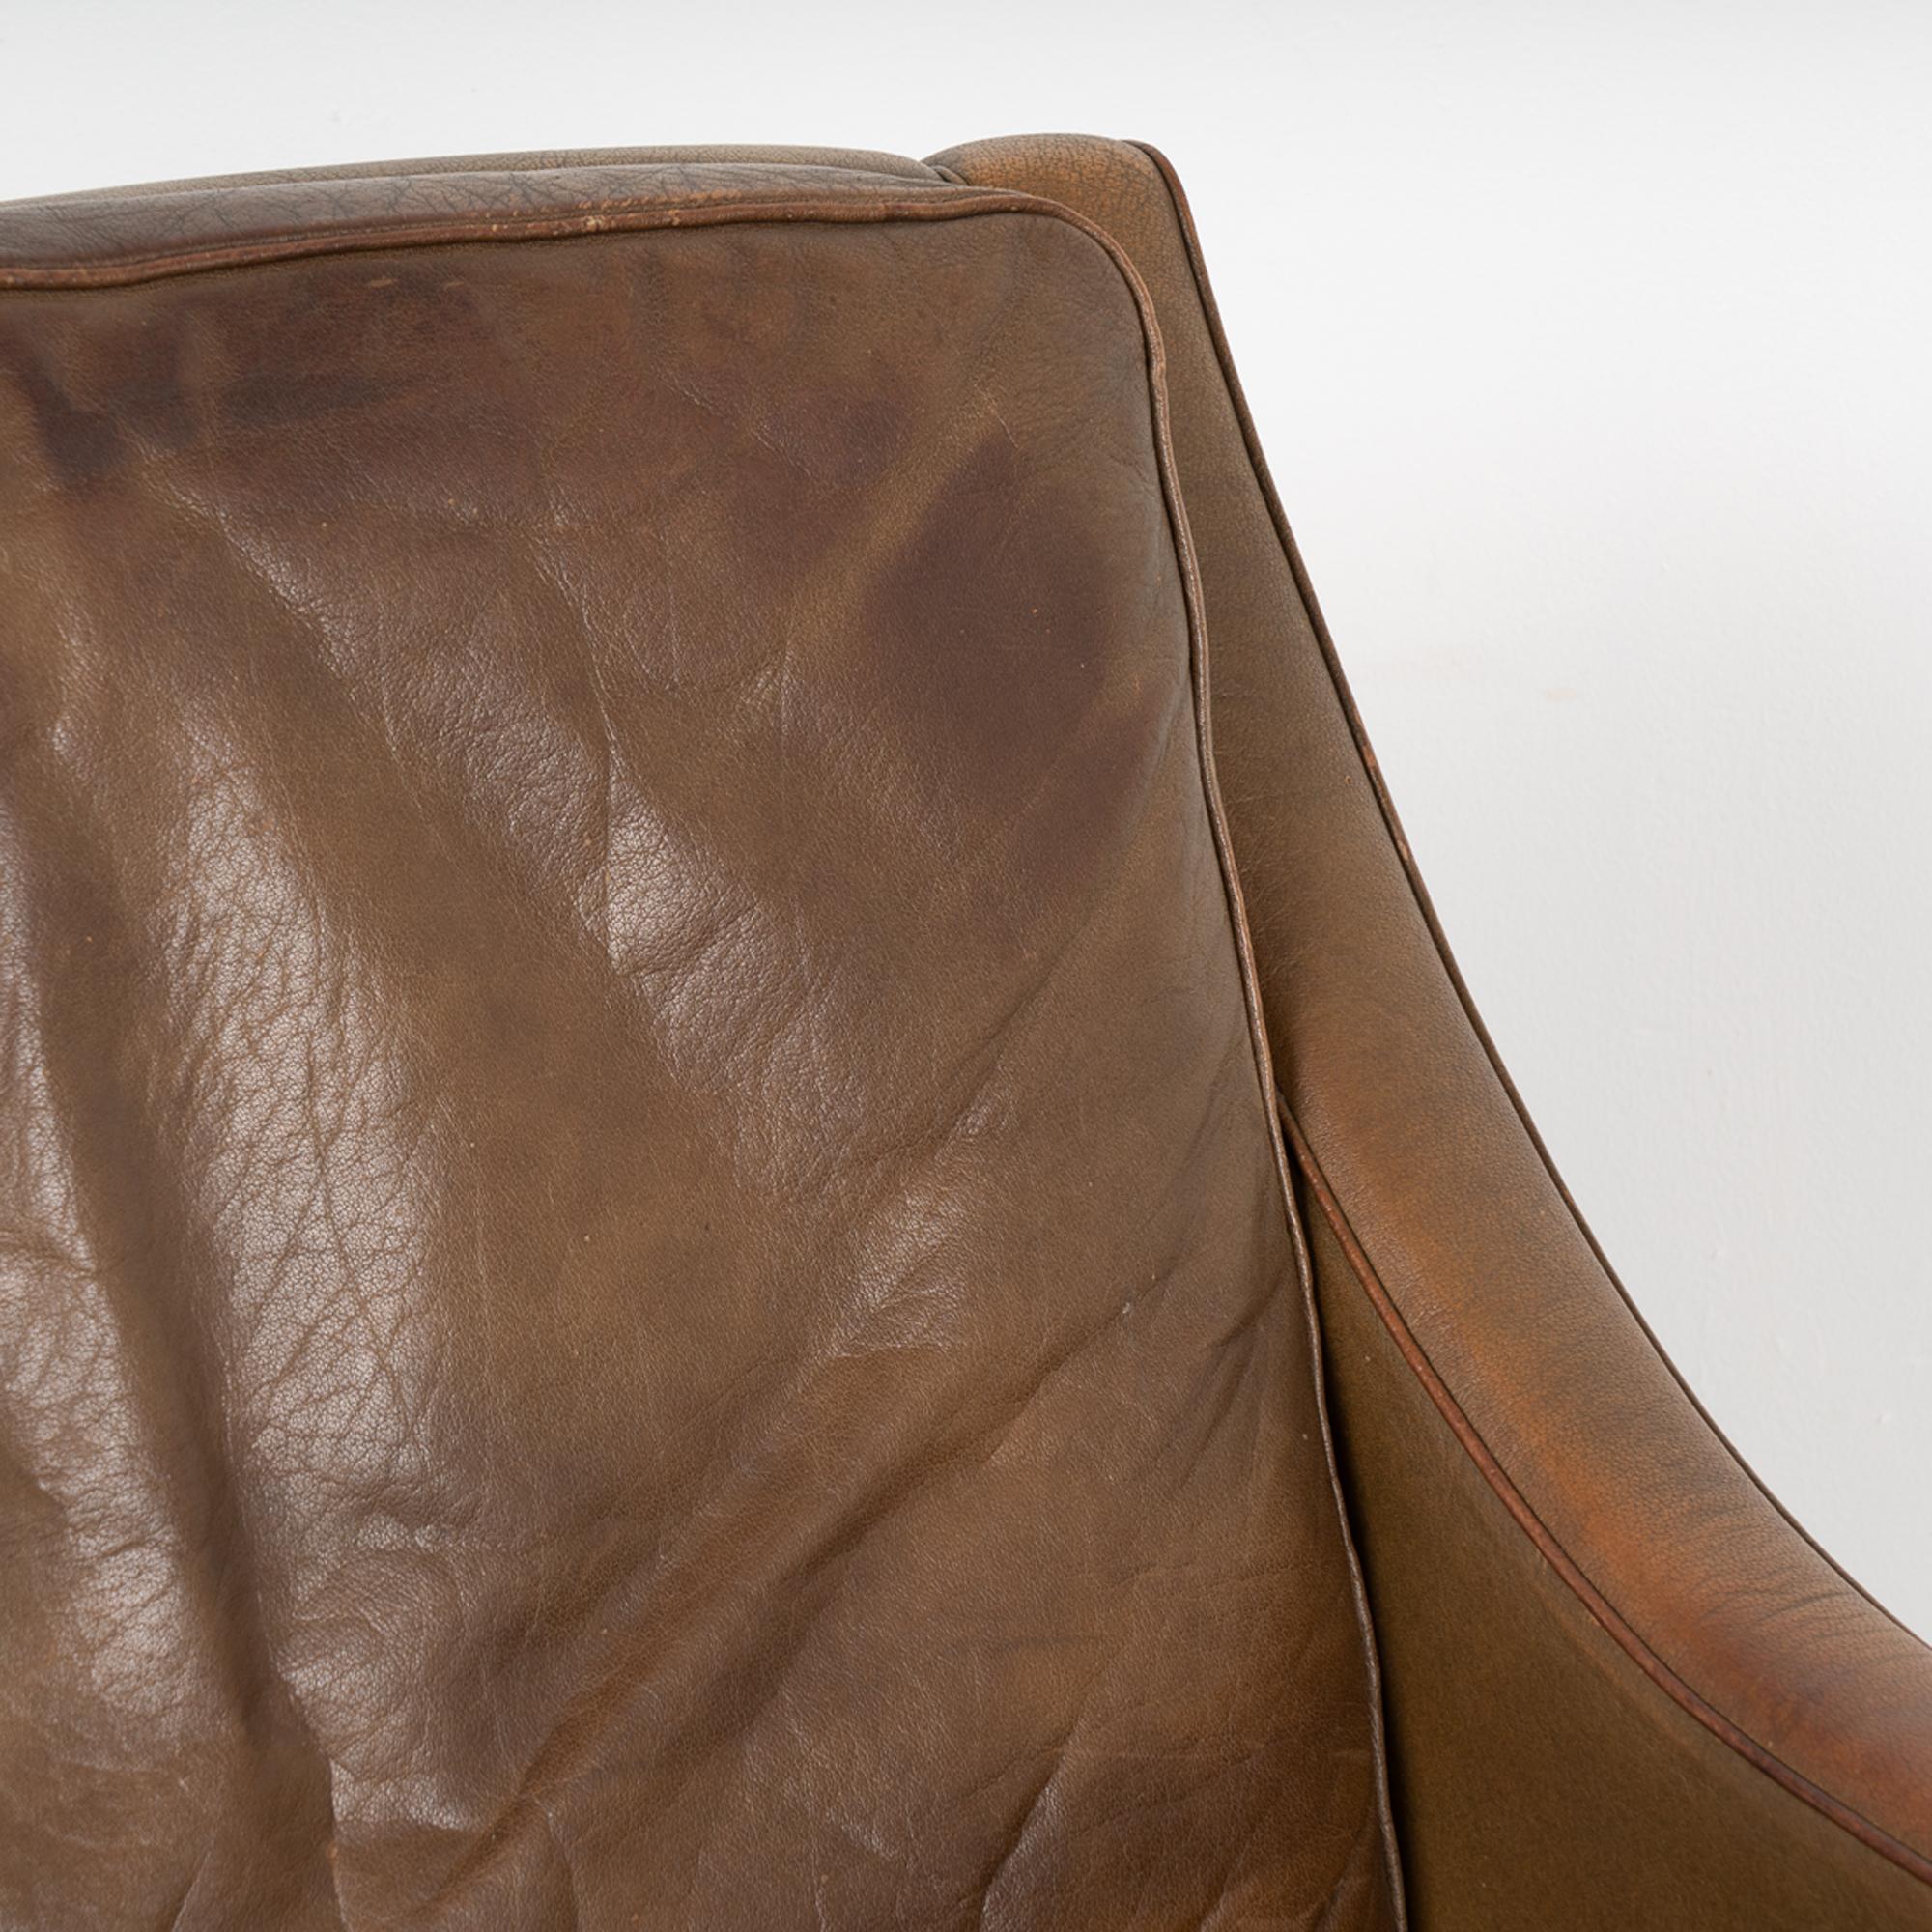 Mid Century Brown Vintage Leather Arm Chair, Denmark circa 1960-70 For Sale 2